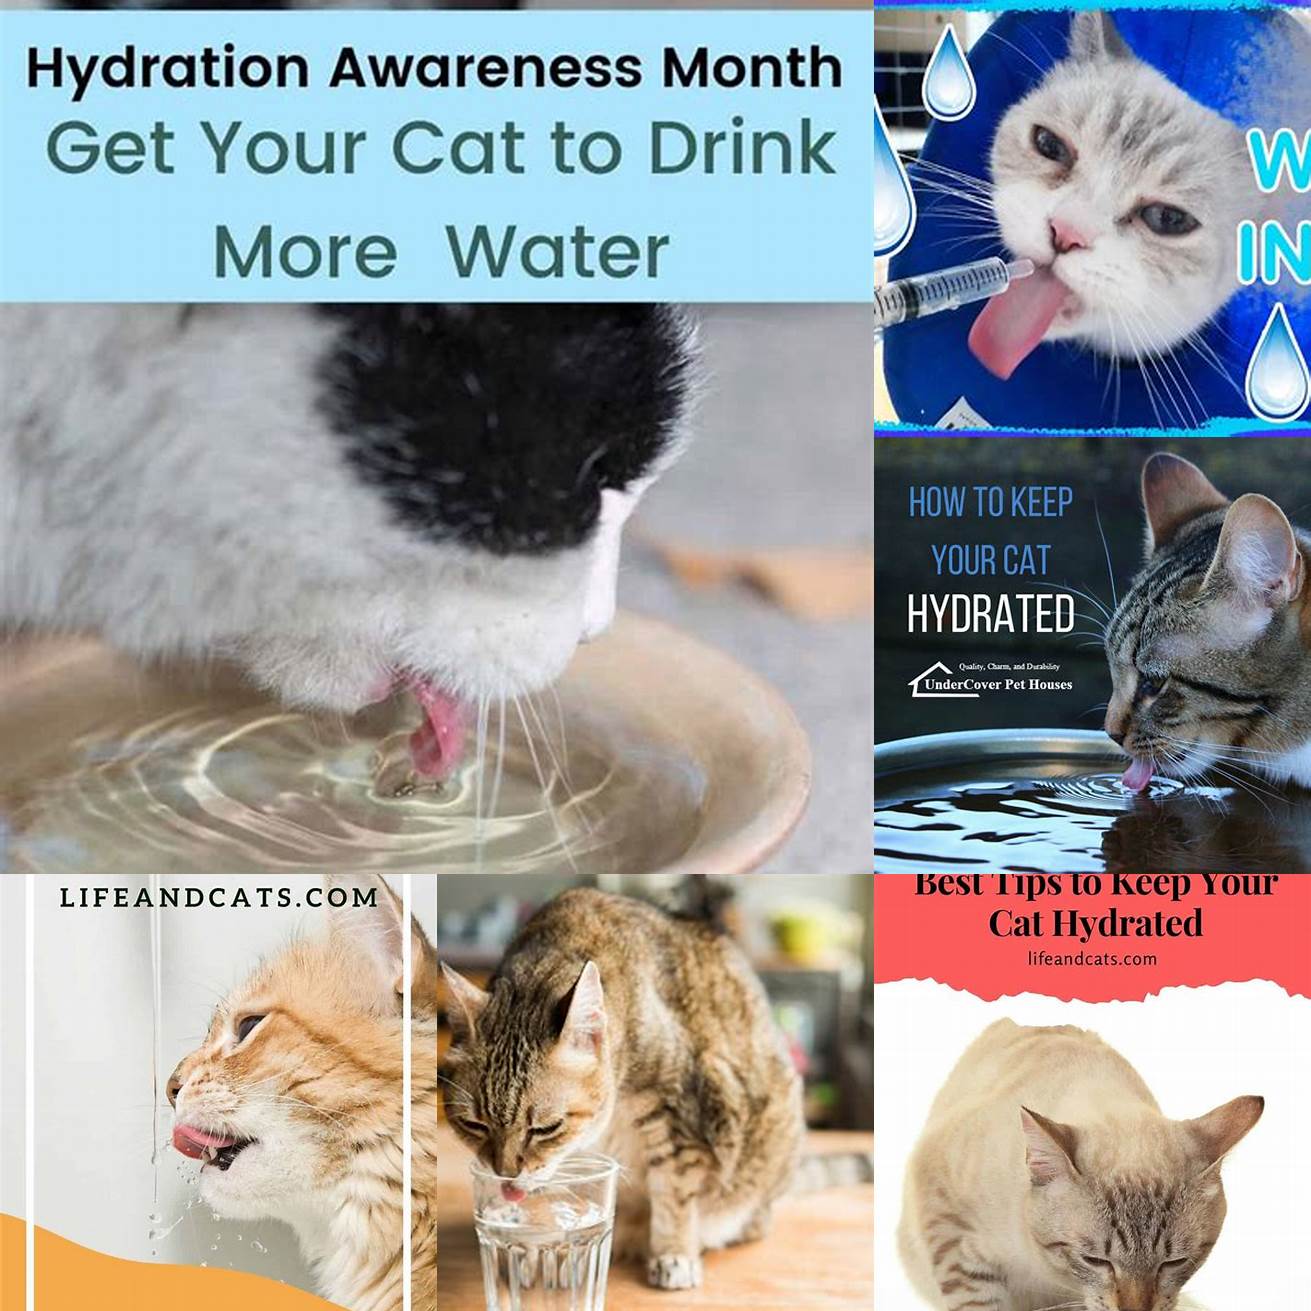 How can you keep your cat hydrated